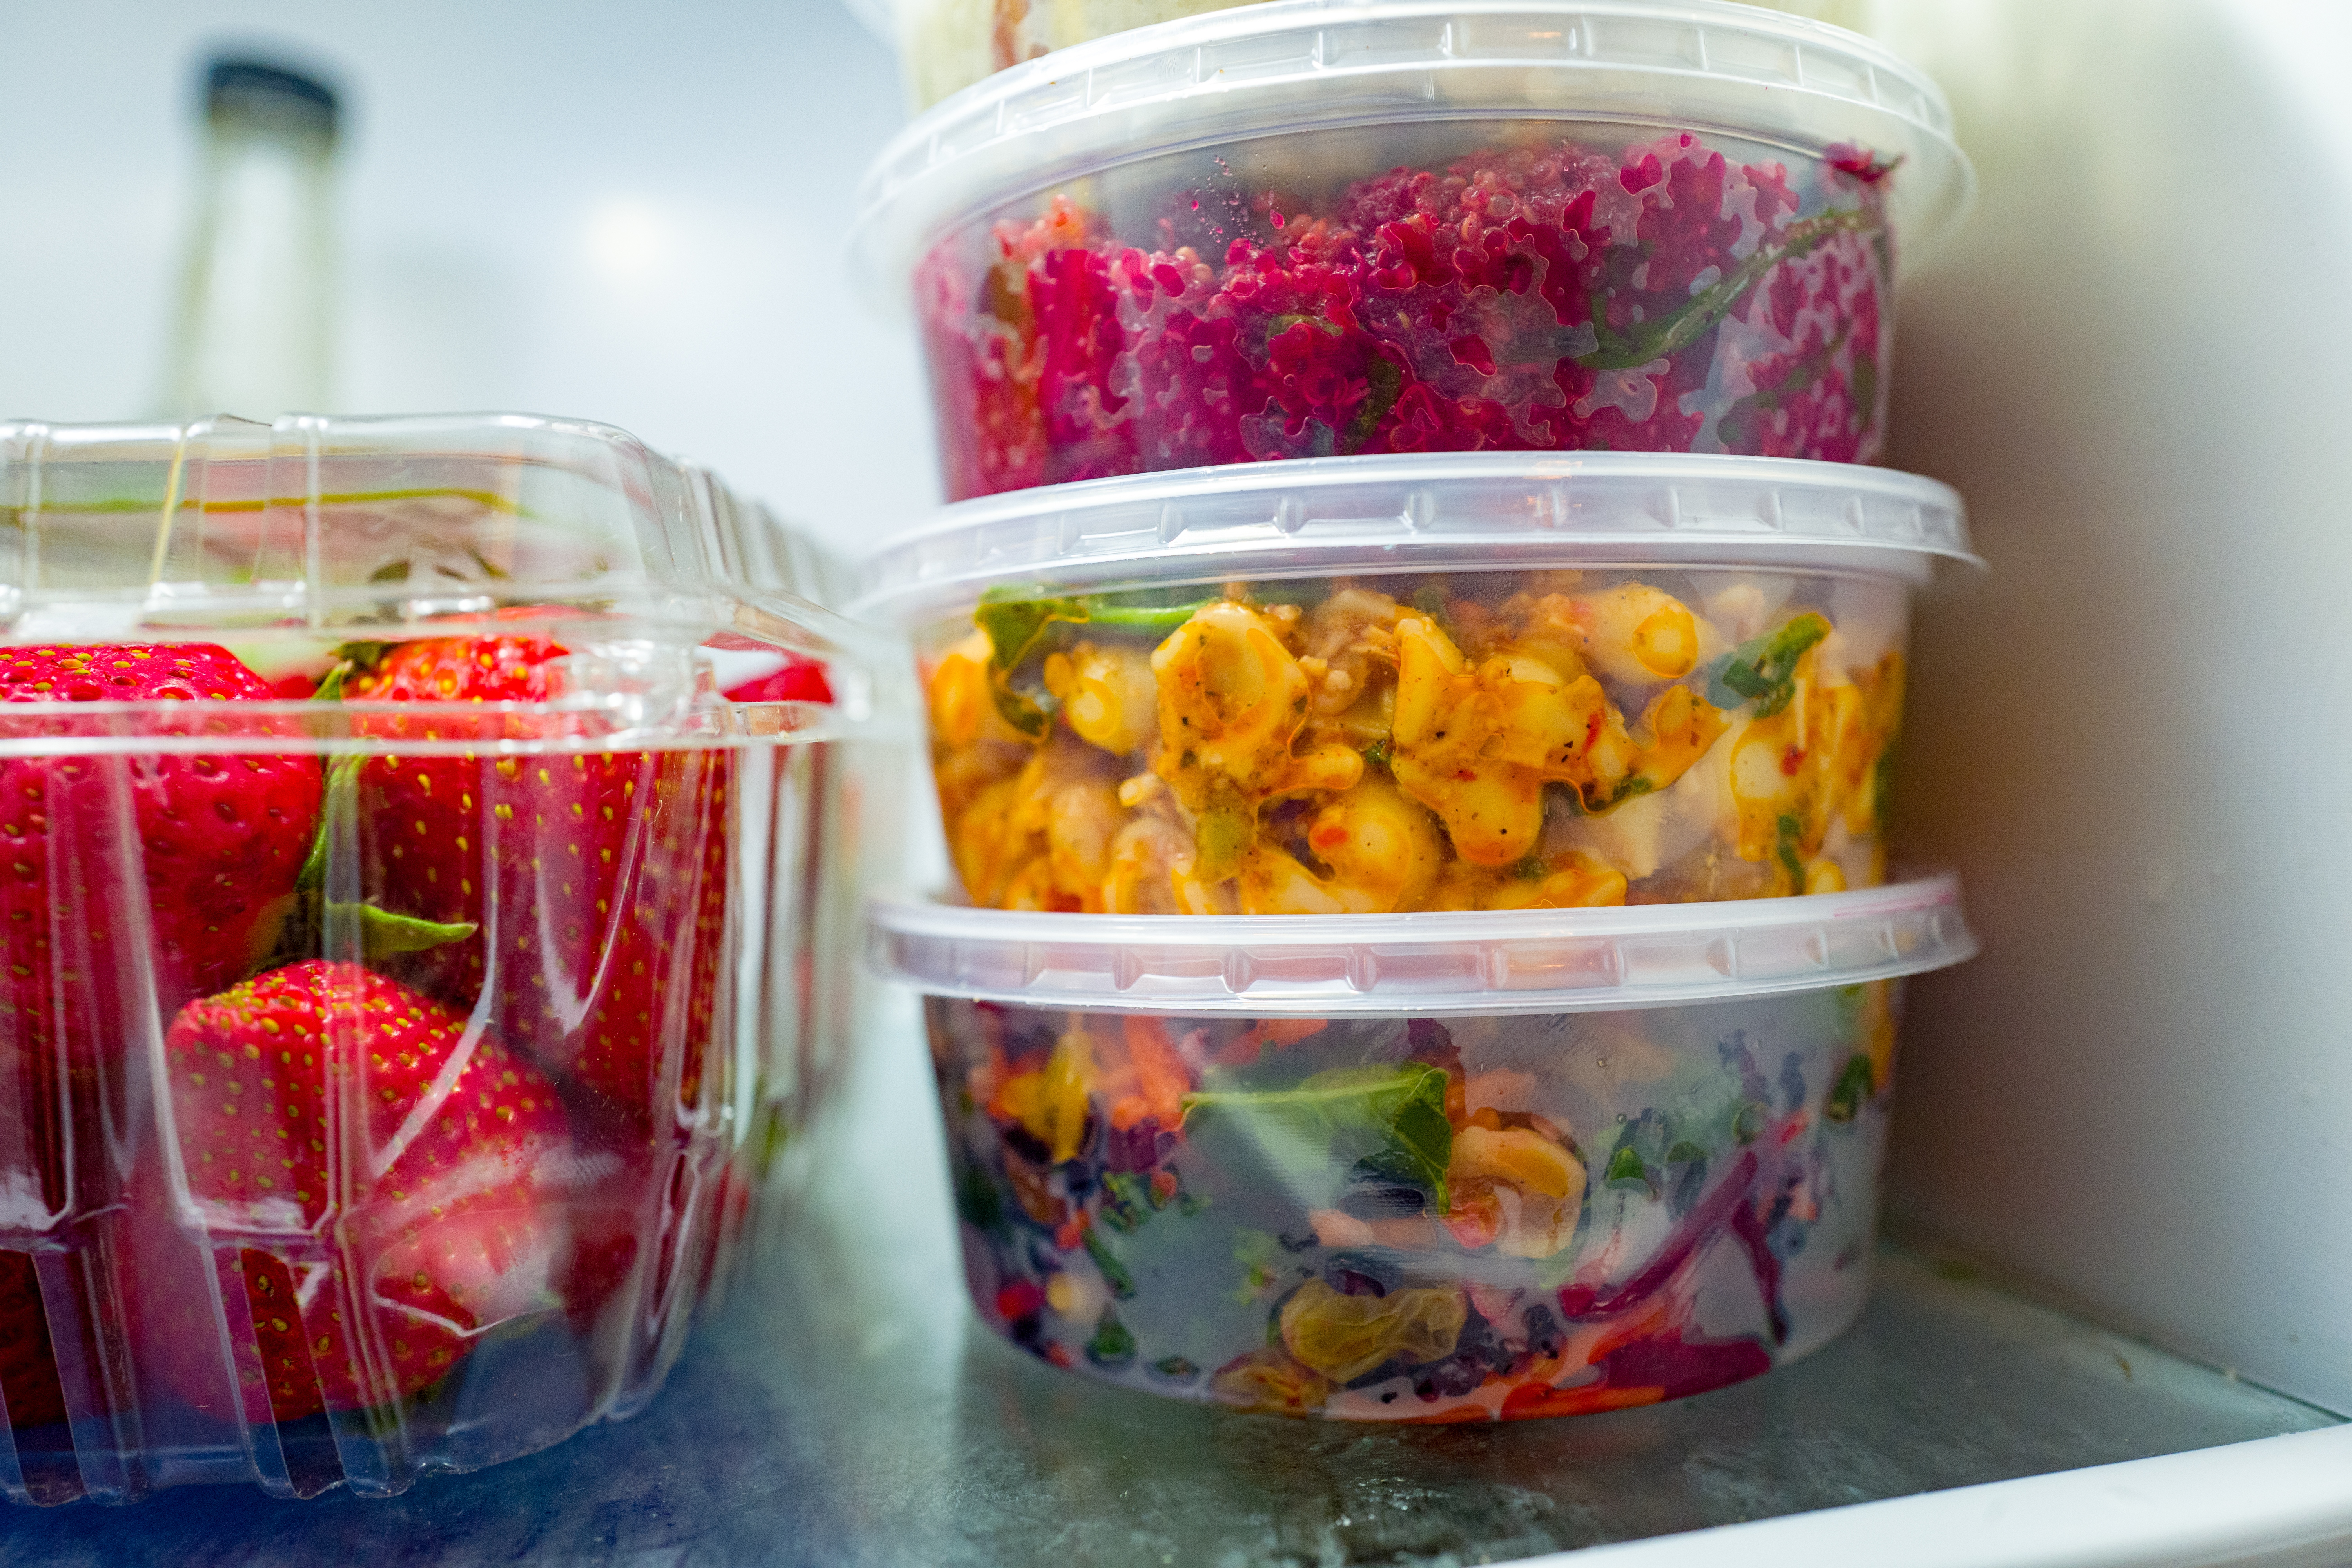 How to Sterilize Plastic Containers